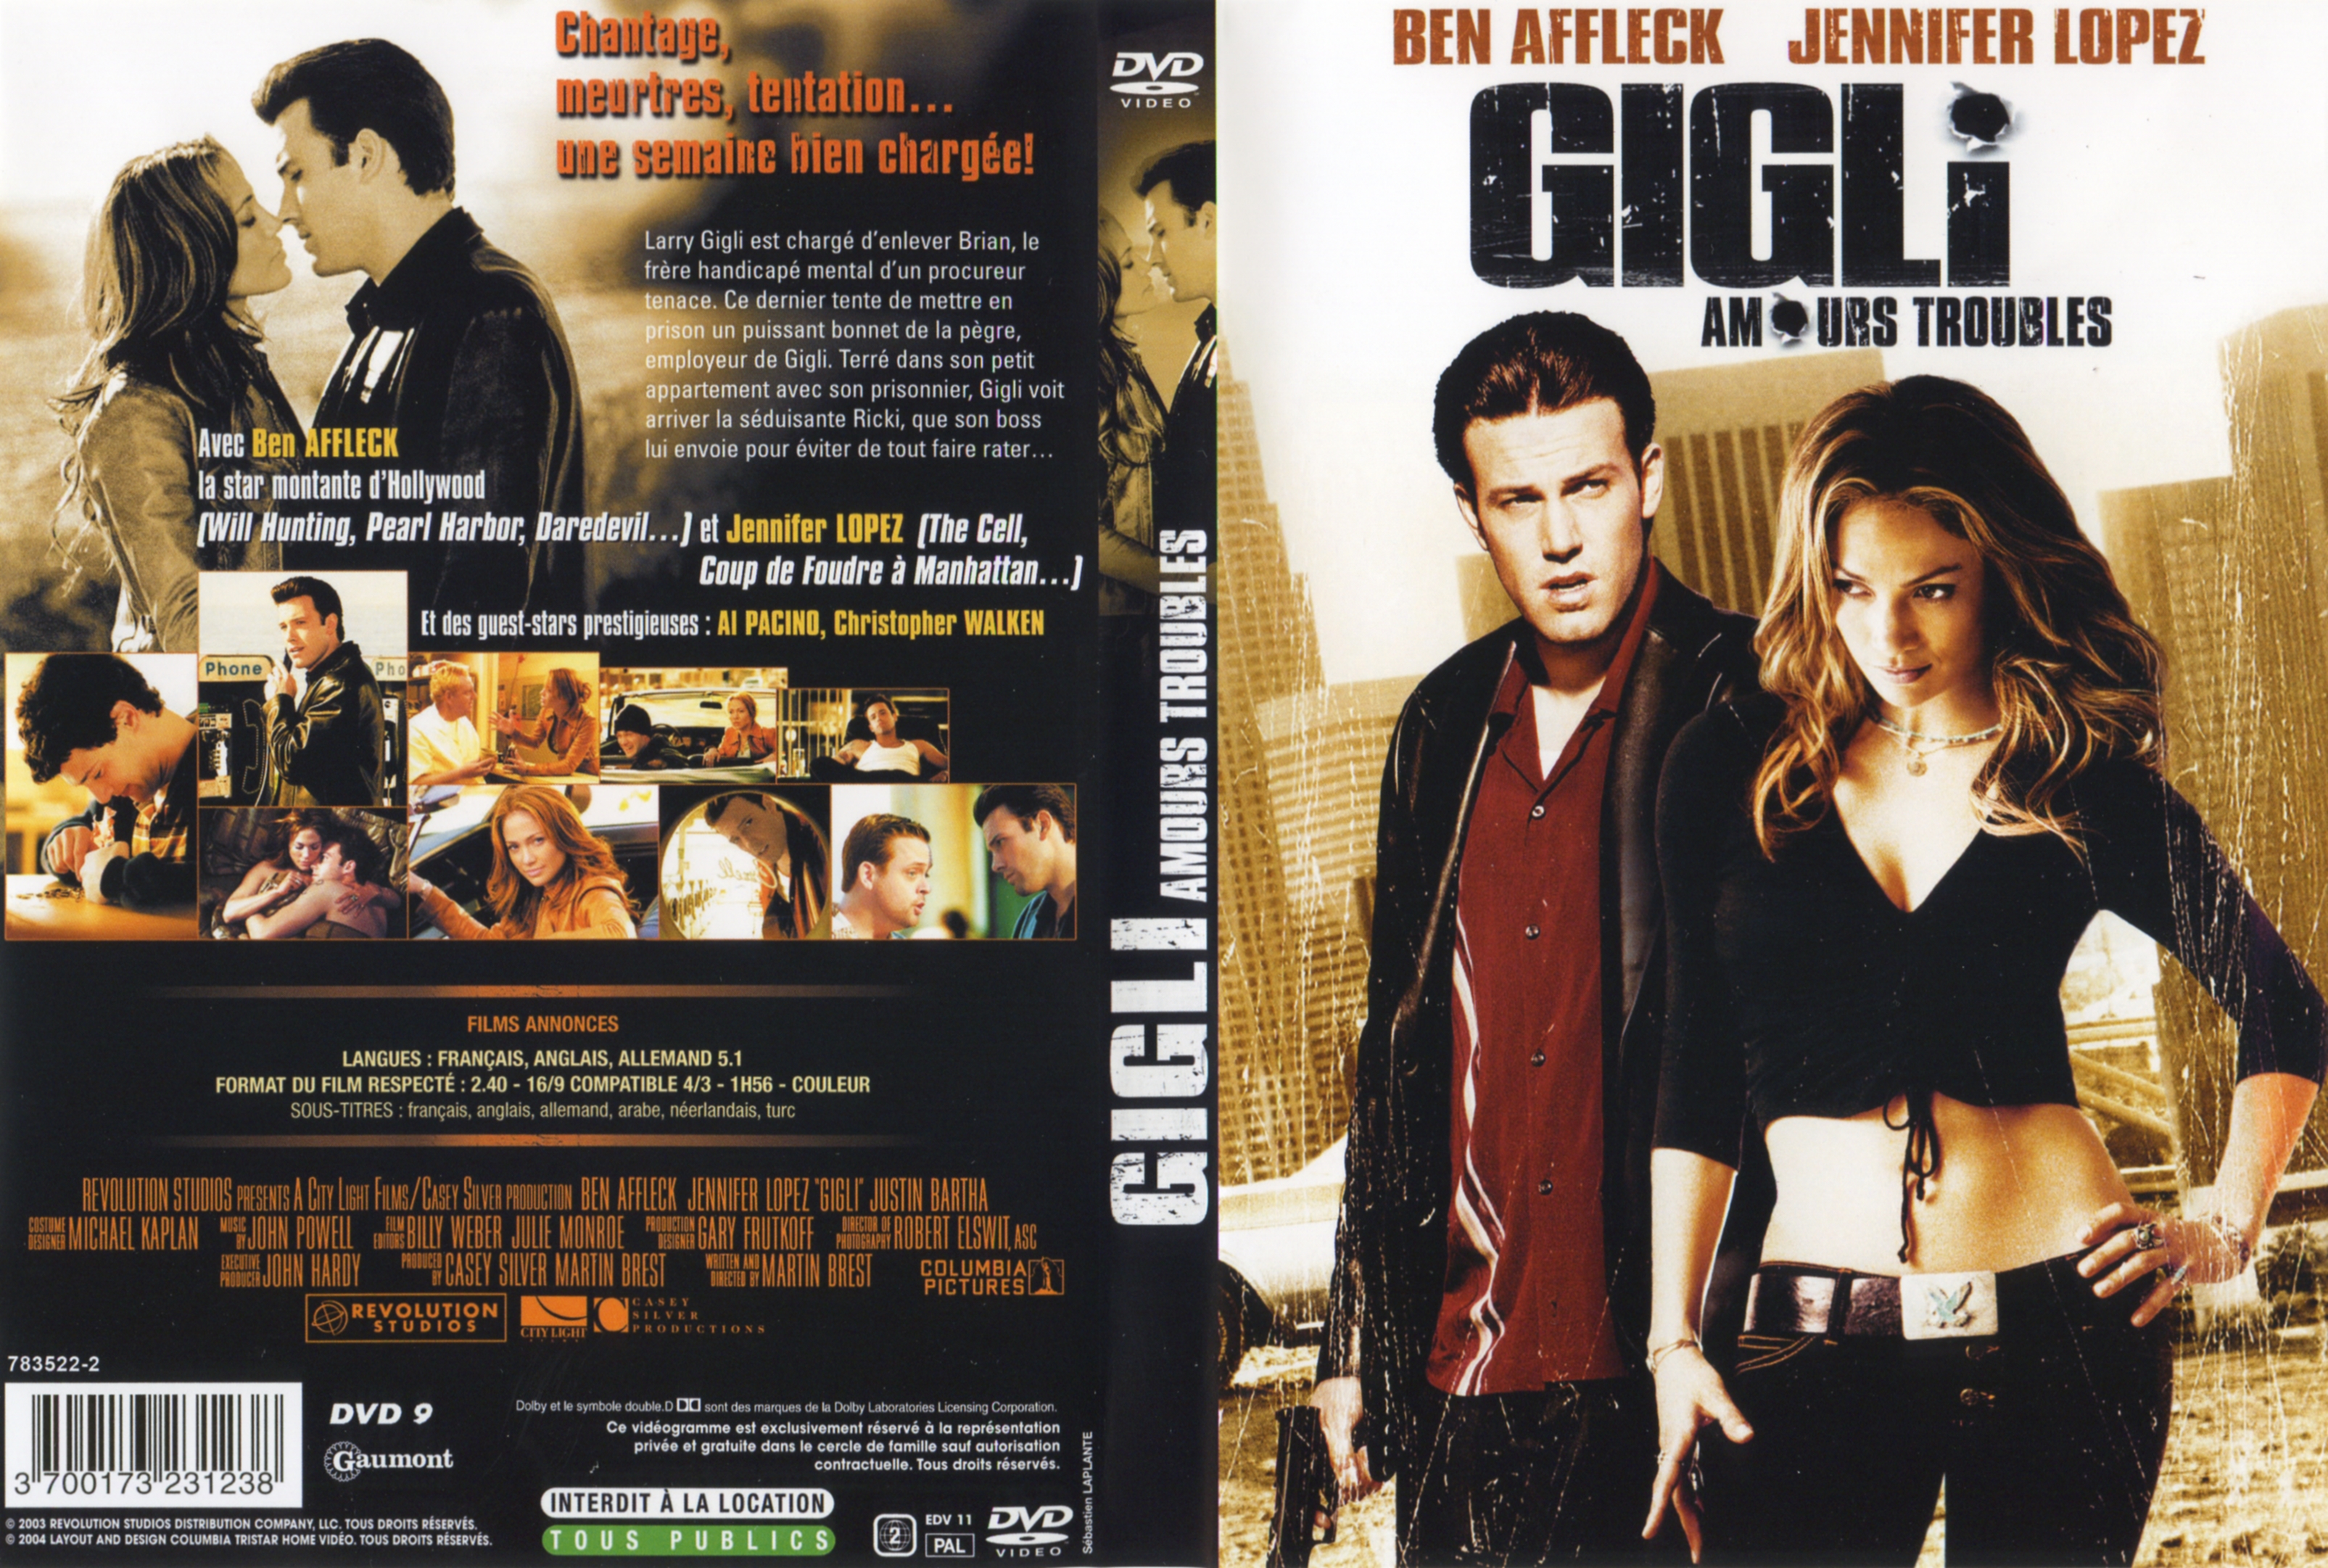 Jaquette DVD Gigli Amours troubles v2